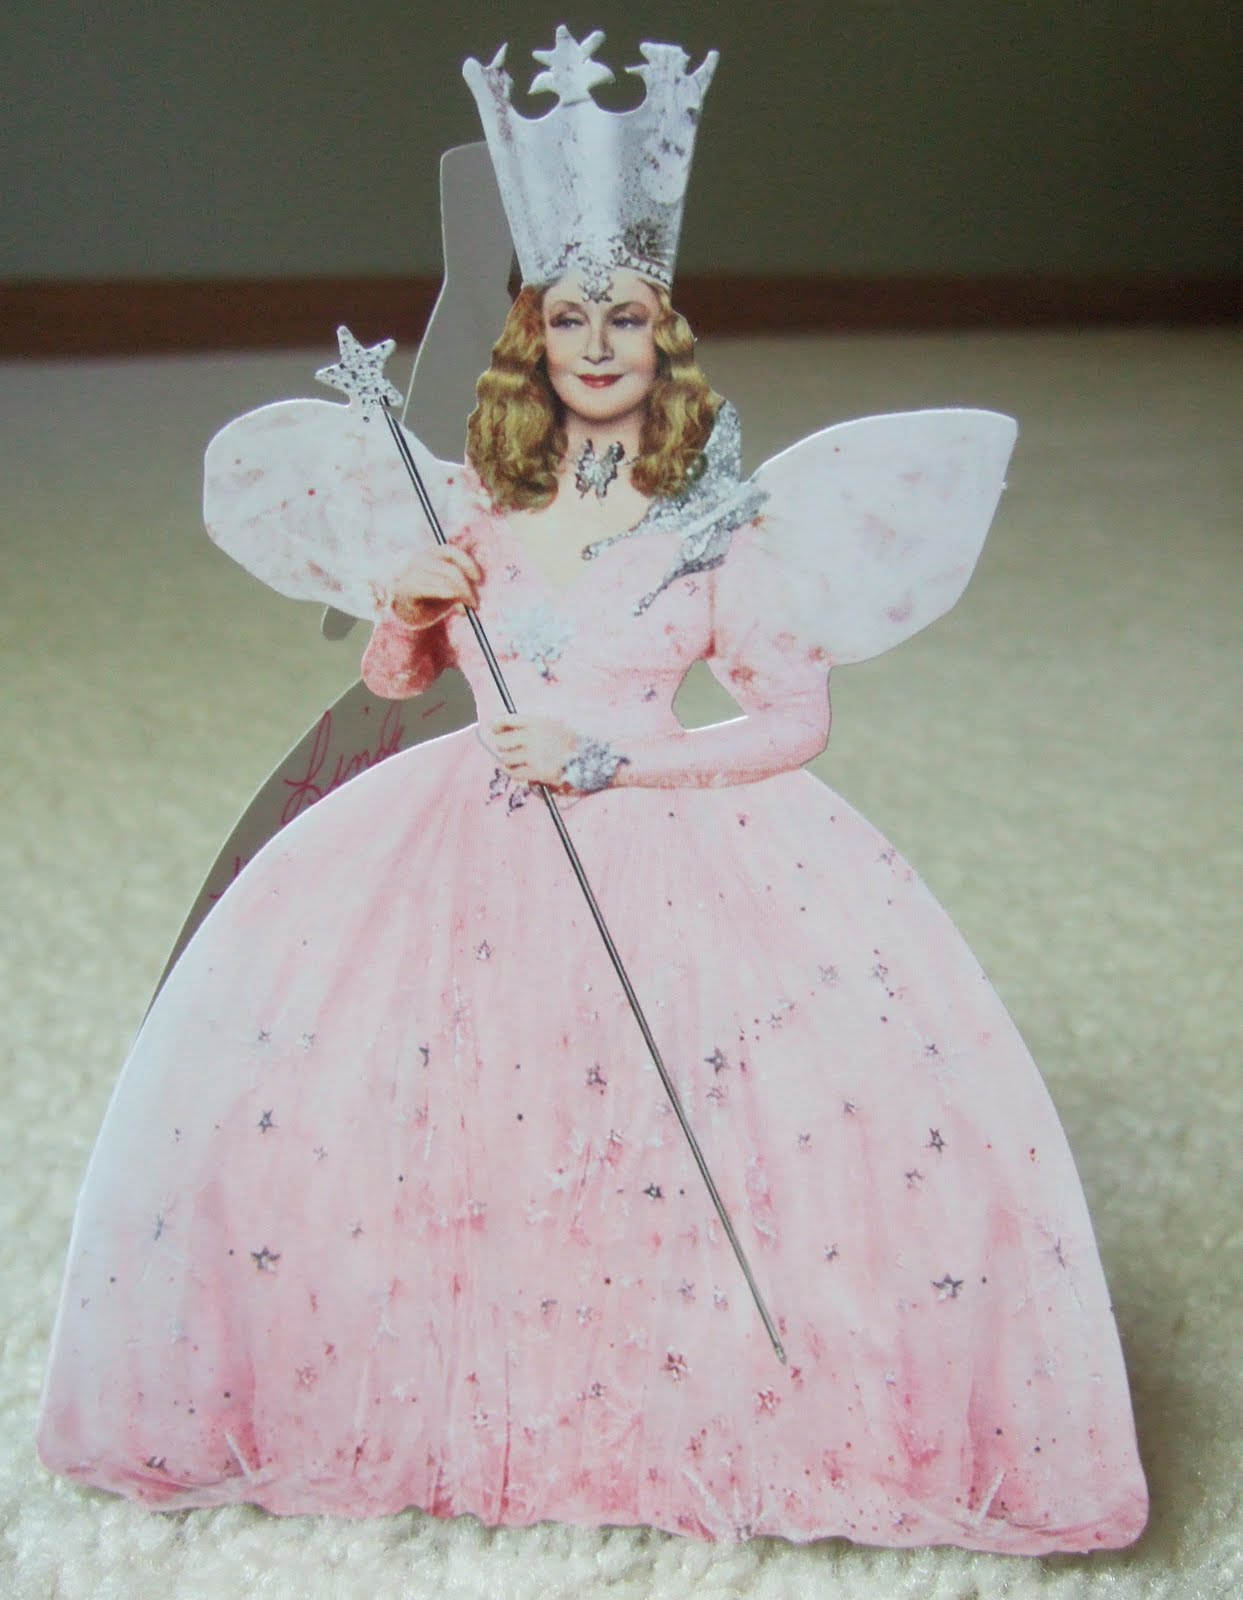 Template For Glinda The Good Witch Crown